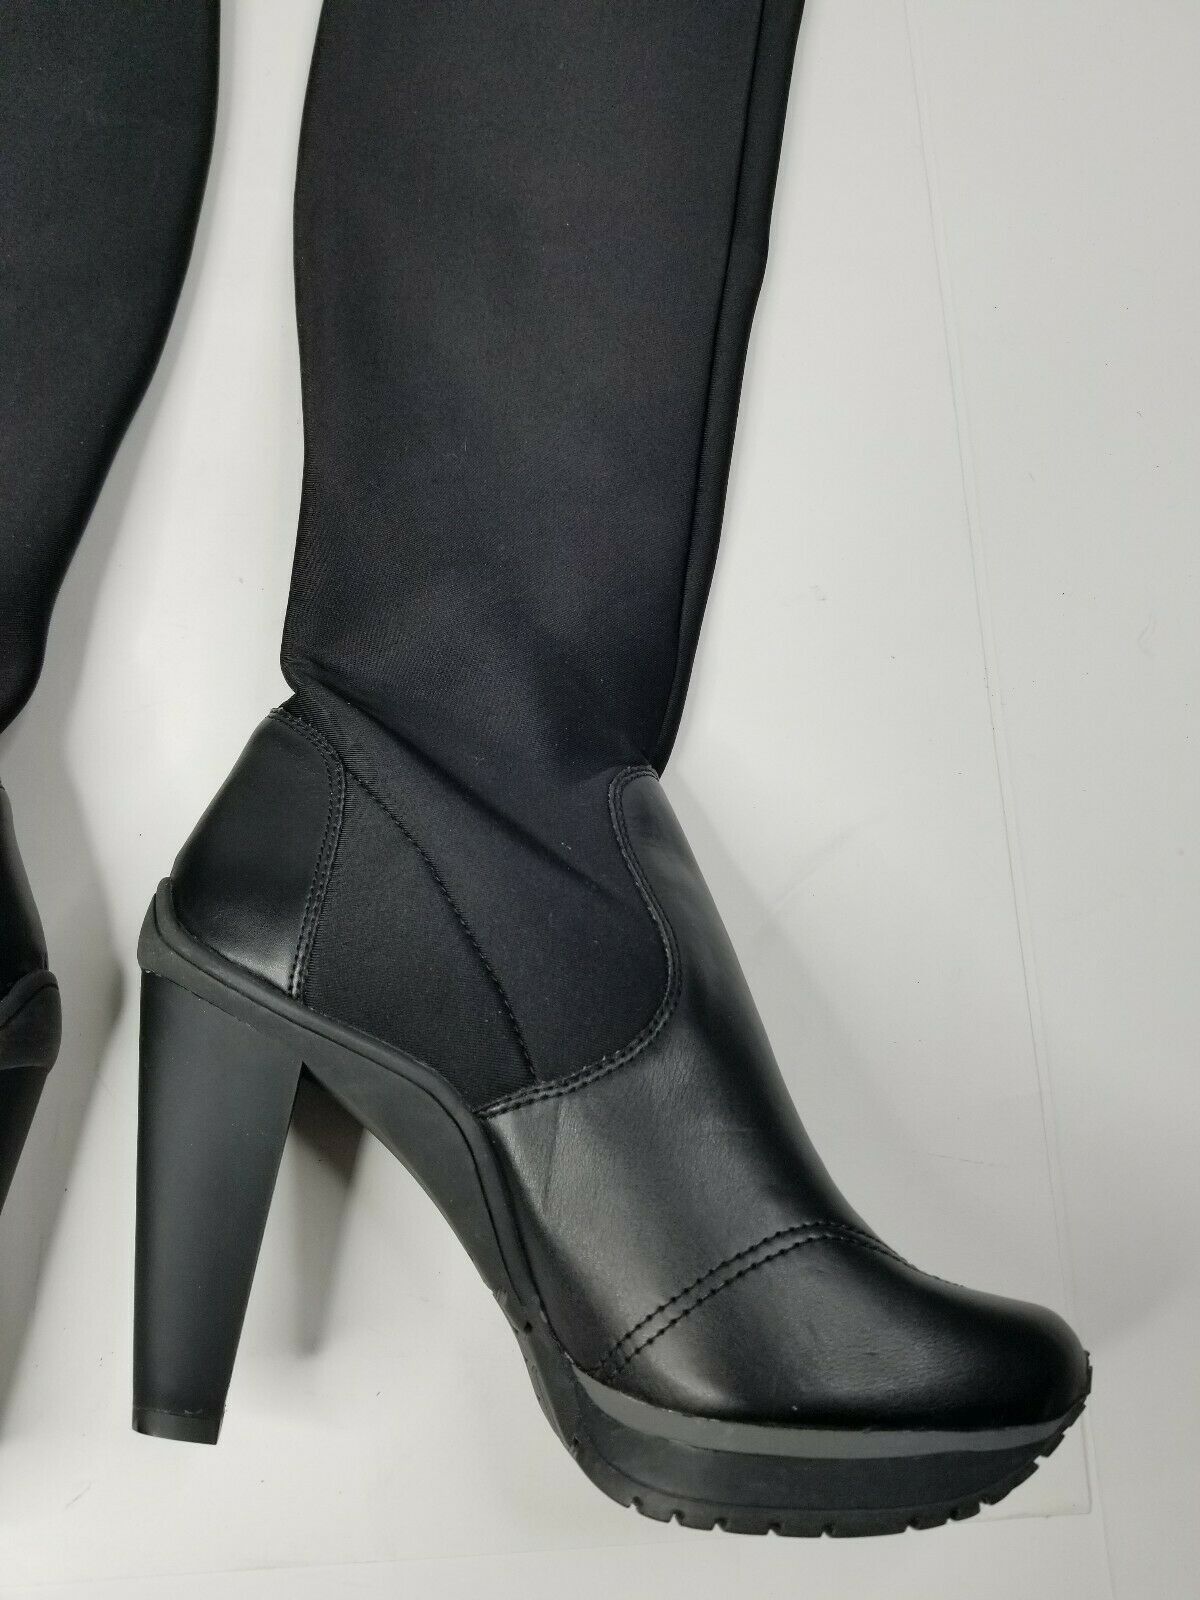 DKNY DKNY Browning Womens Black Neoprene Over-The-Knee Boots Size US 10 / EU 43 - 7 Thumbnail